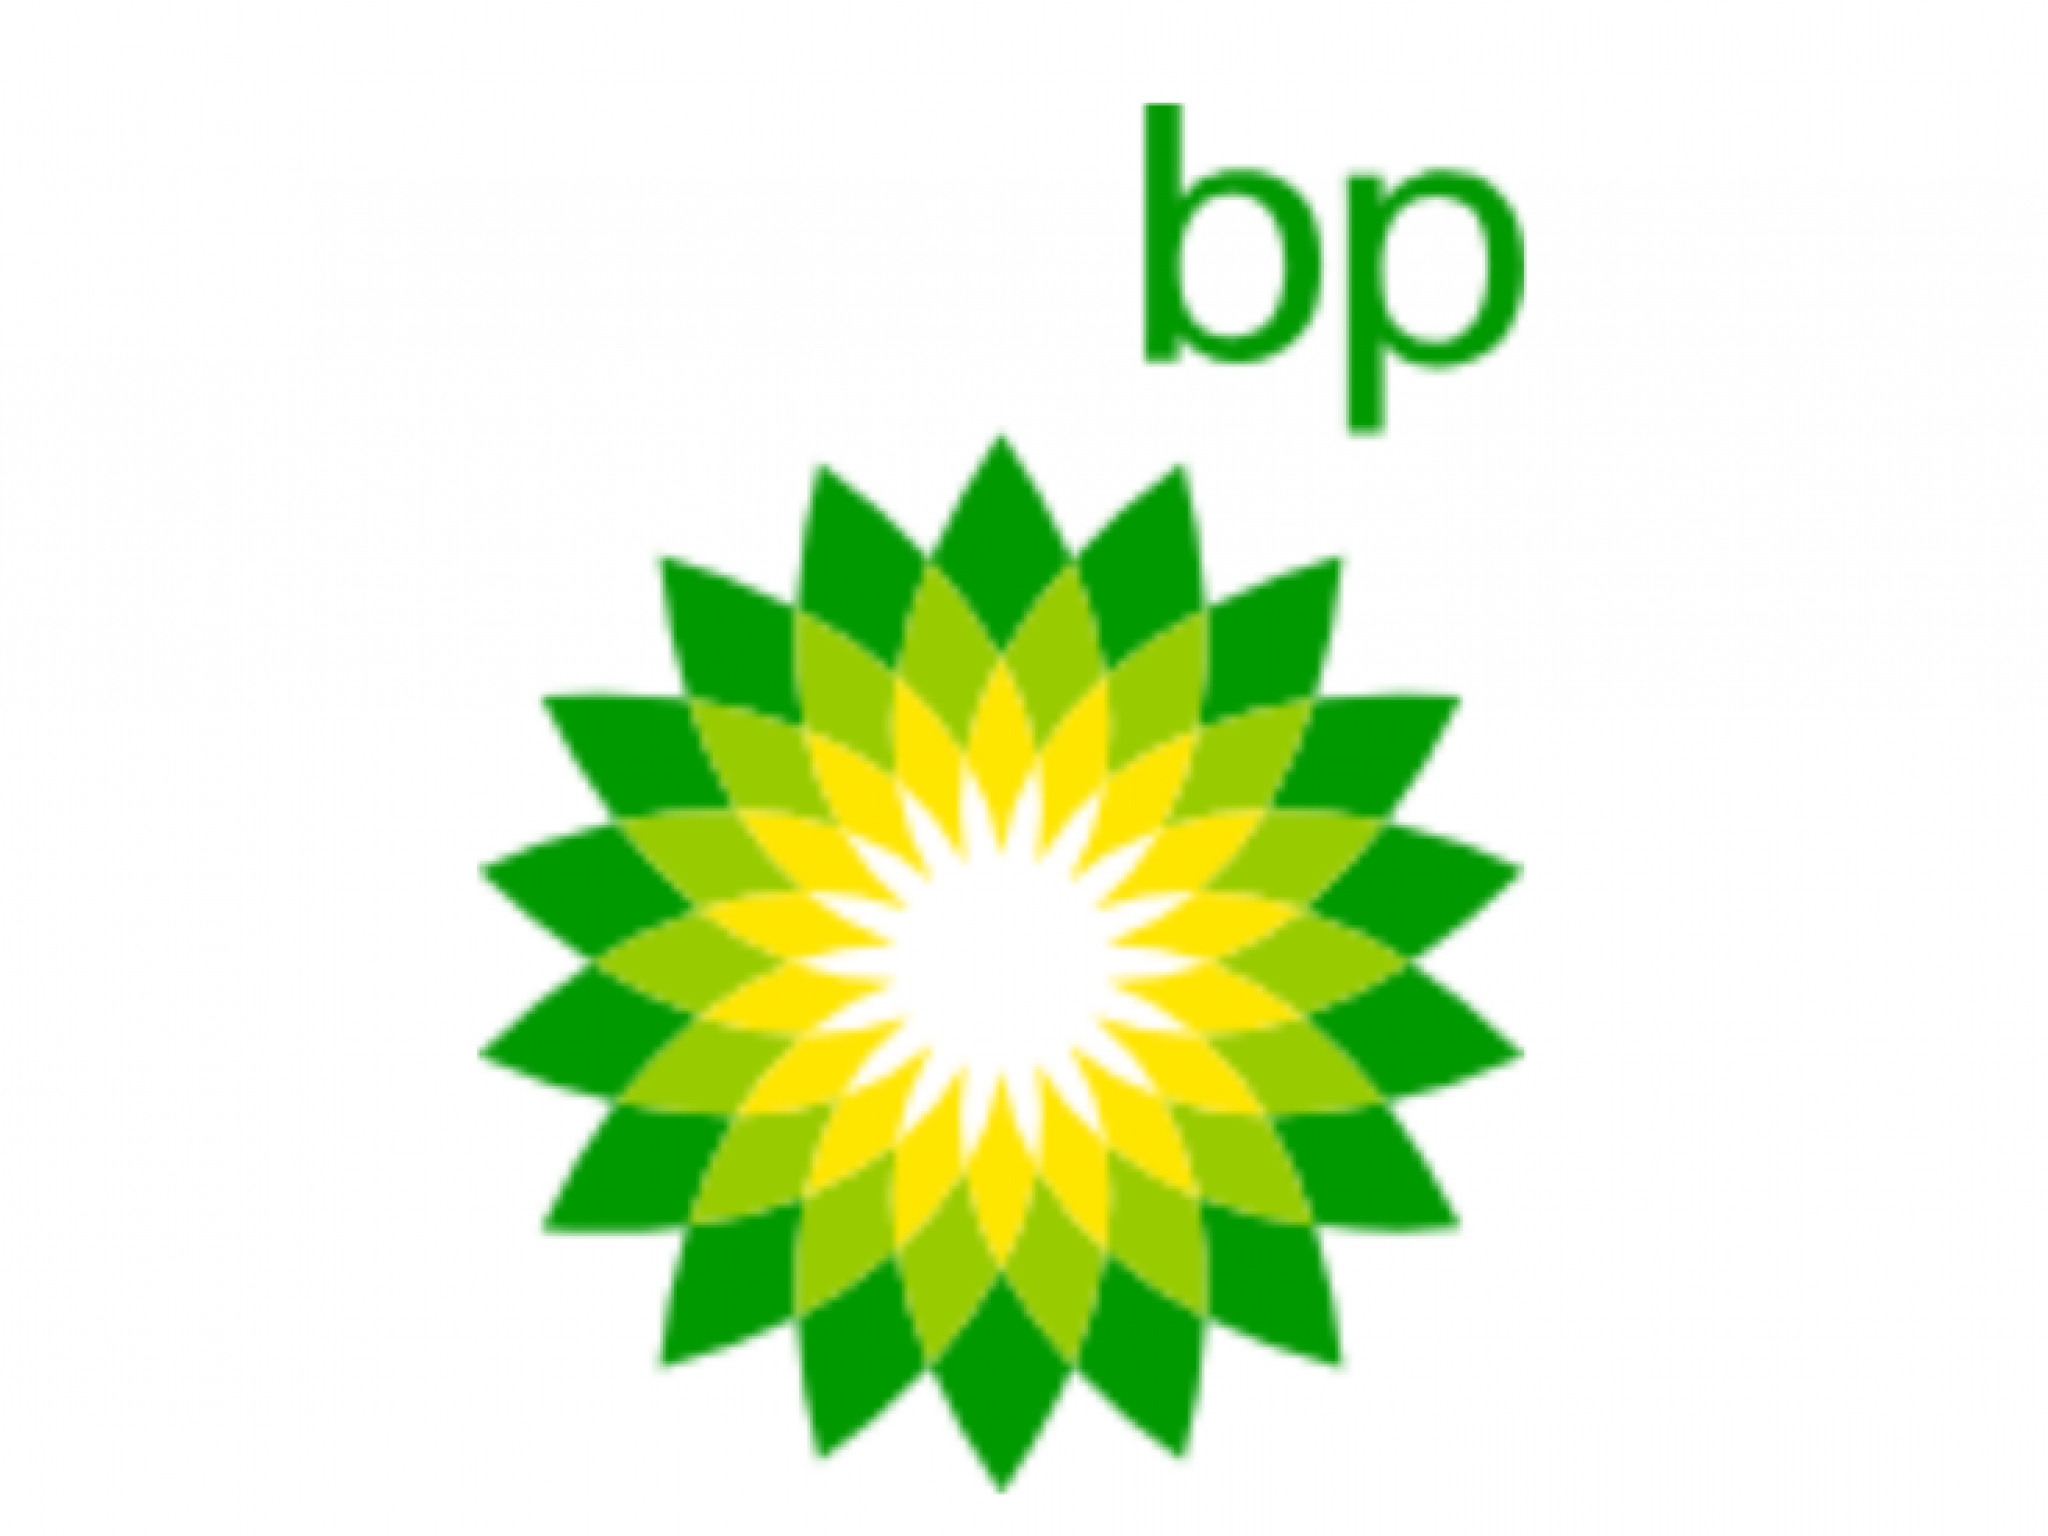  whats-going-on-with-british-oil-giant-bp-stock-friday 